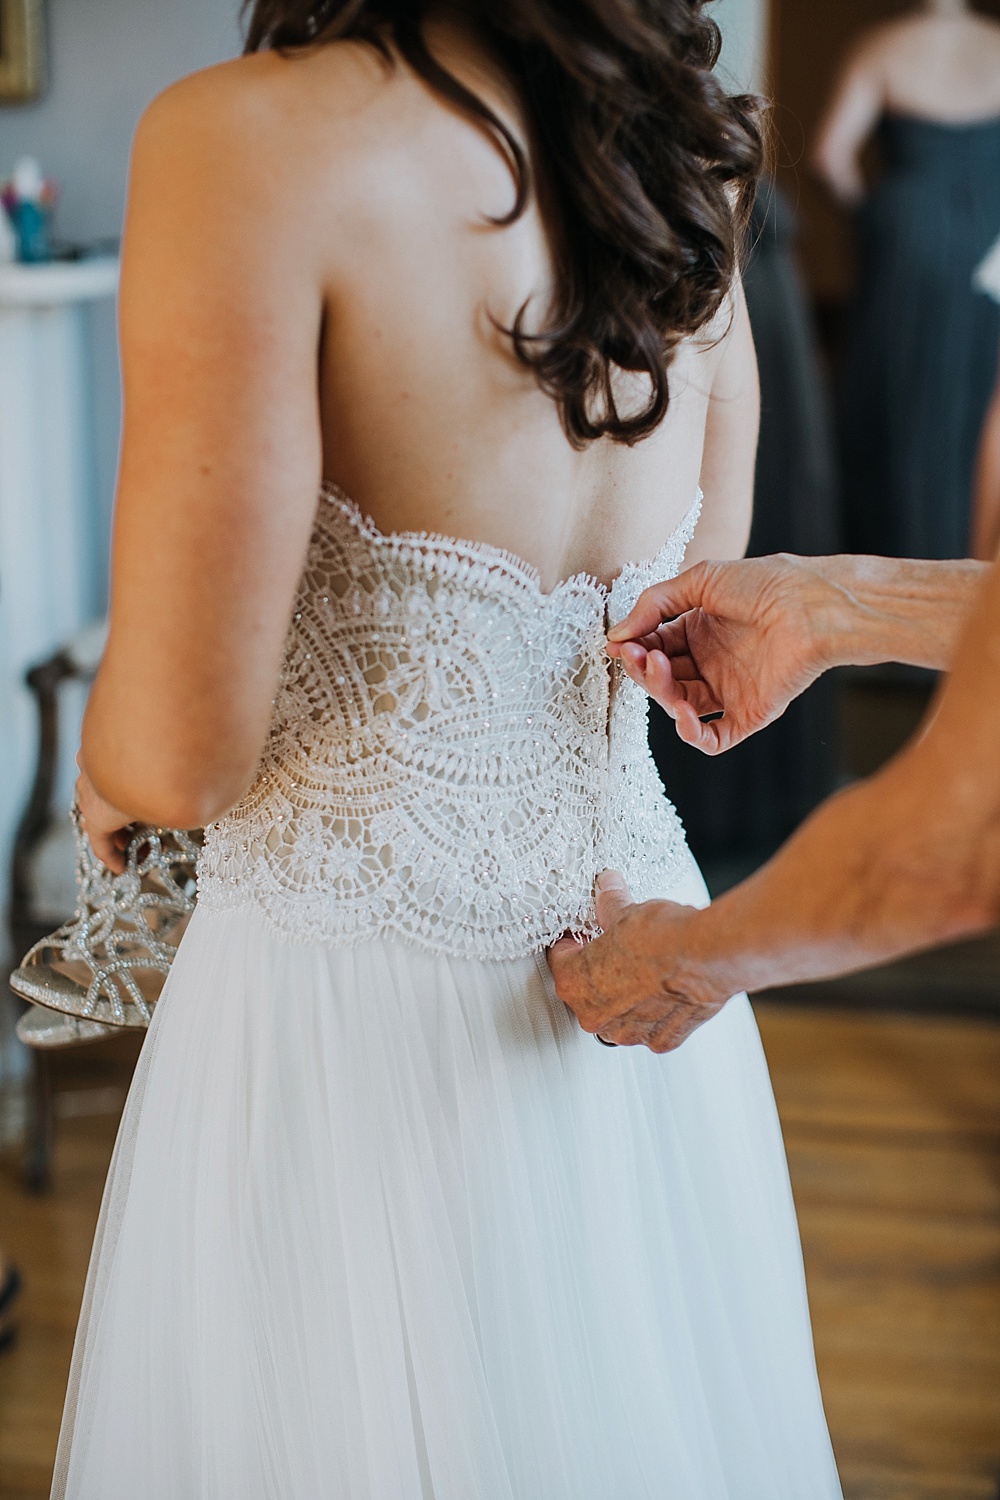 Wedding dress being zipped up at Elks Lodge San Rafael Wedding by Amy Thompson Photography